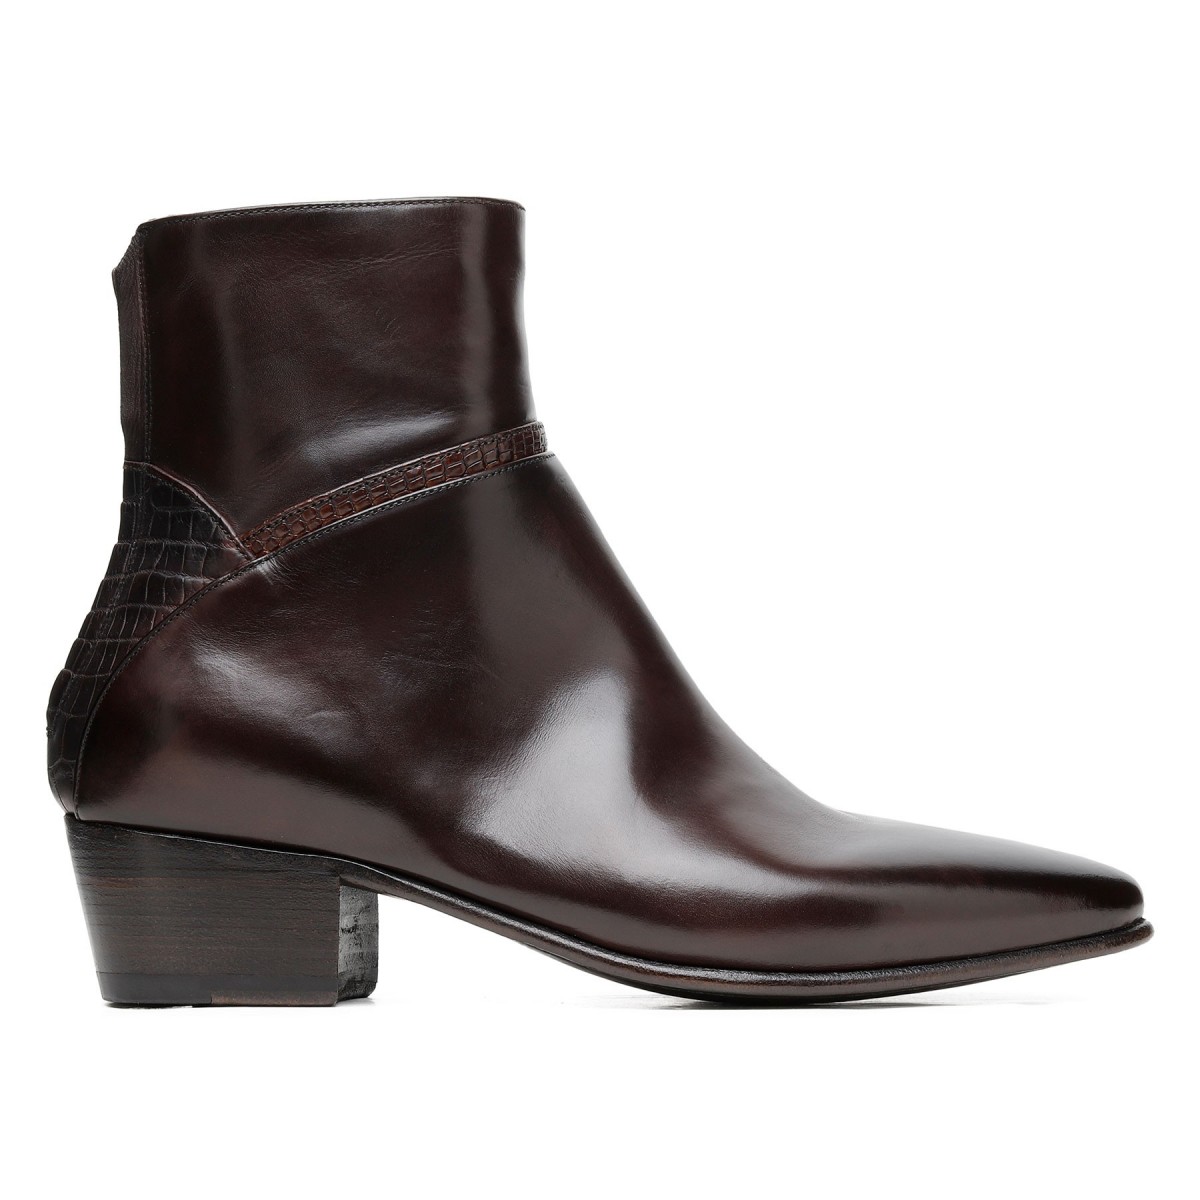 Brown calf leather ankle boots